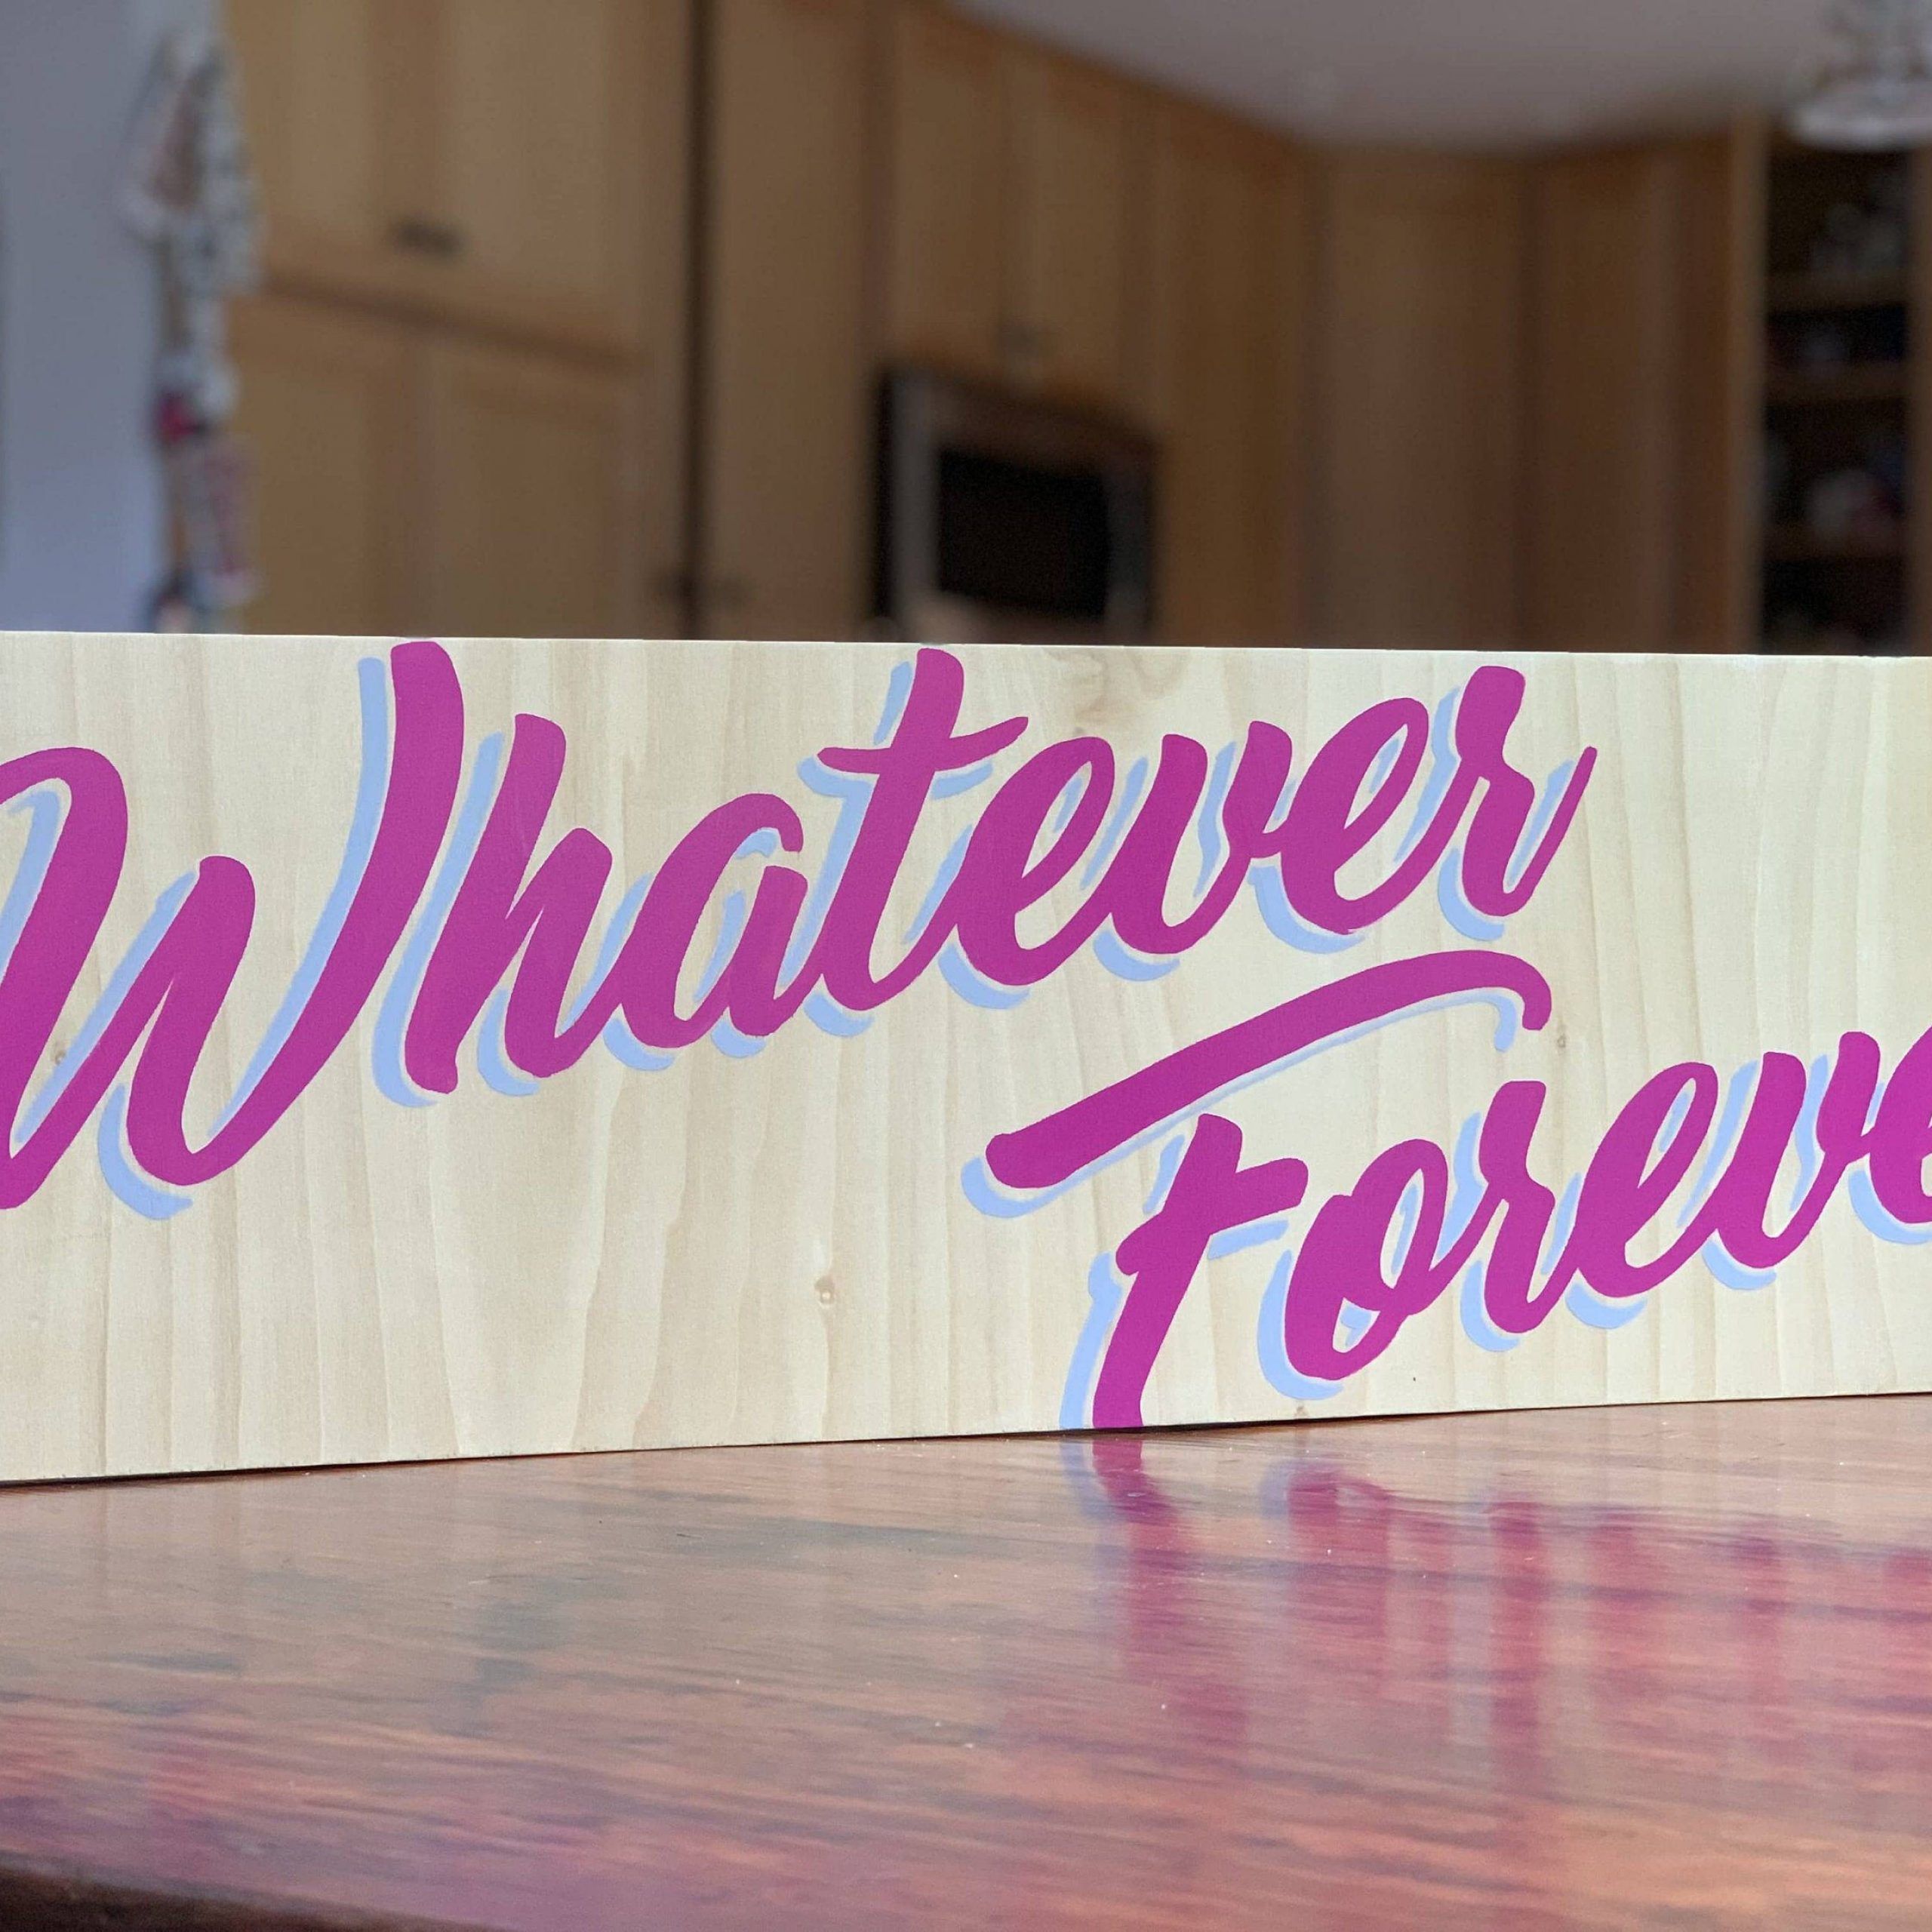 Whatever Forever Wooden Sign Funny Sign Fun Wall Art Home | Etsy Inside 2018 Fun Wall Art (View 8 of 20)